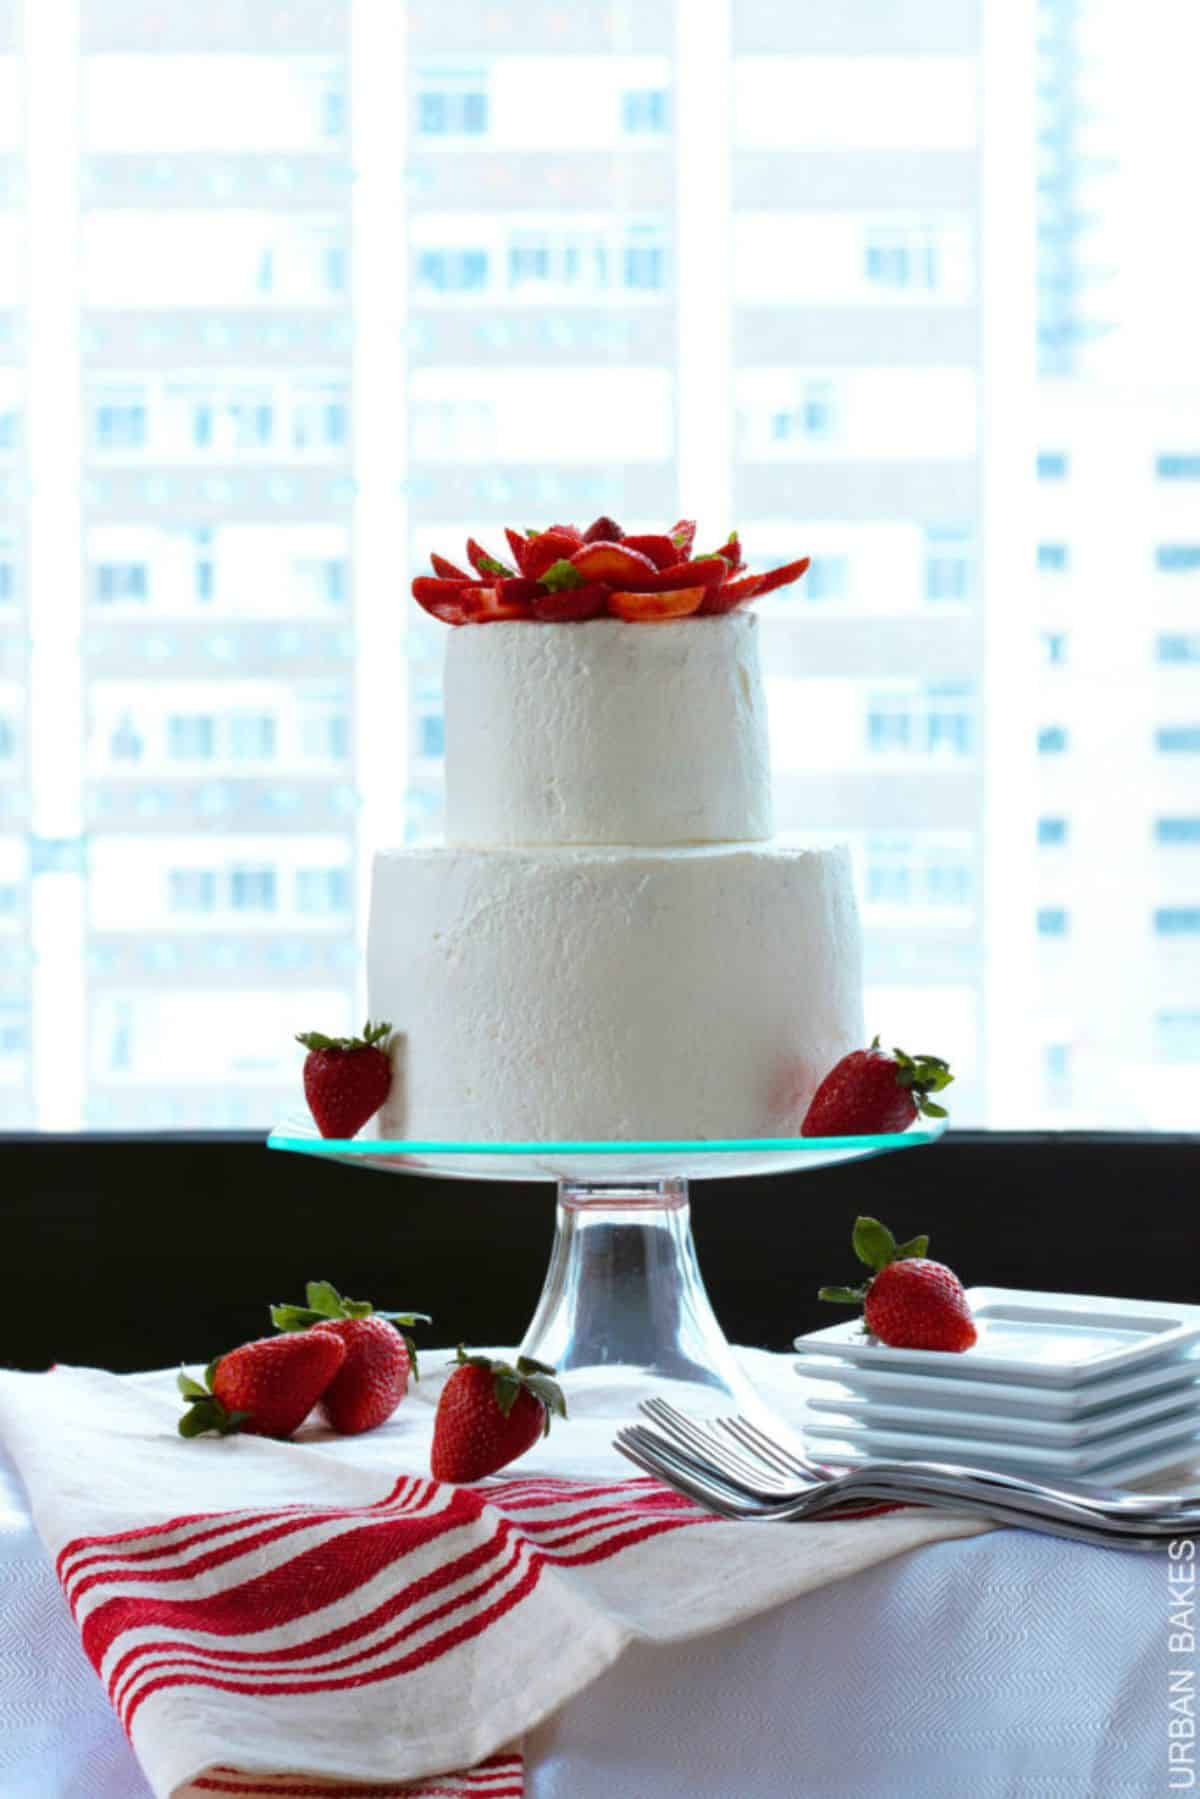 Mouth-watering strawberry urban cake on a glass cake tray.